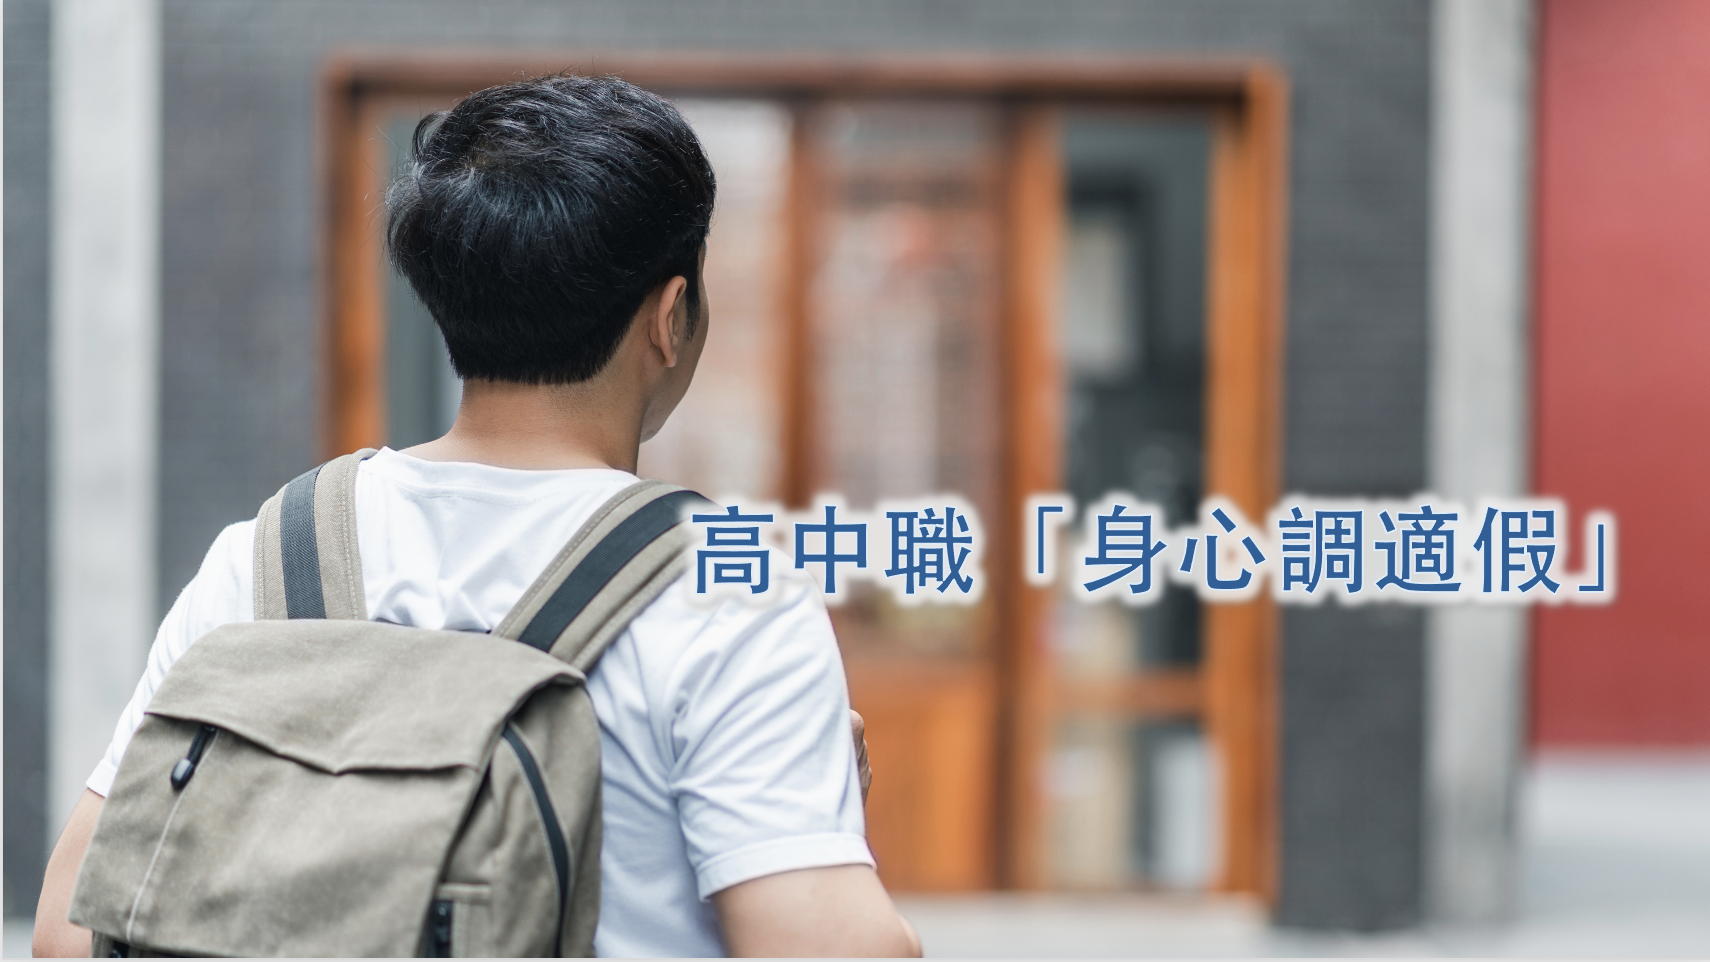  The Ministry of Education (Taiwan) announced plans on July 1st to amend the "Assessment Regulations for Senior High School Students." (Photo: Medical Ding Chinese Editing Group)